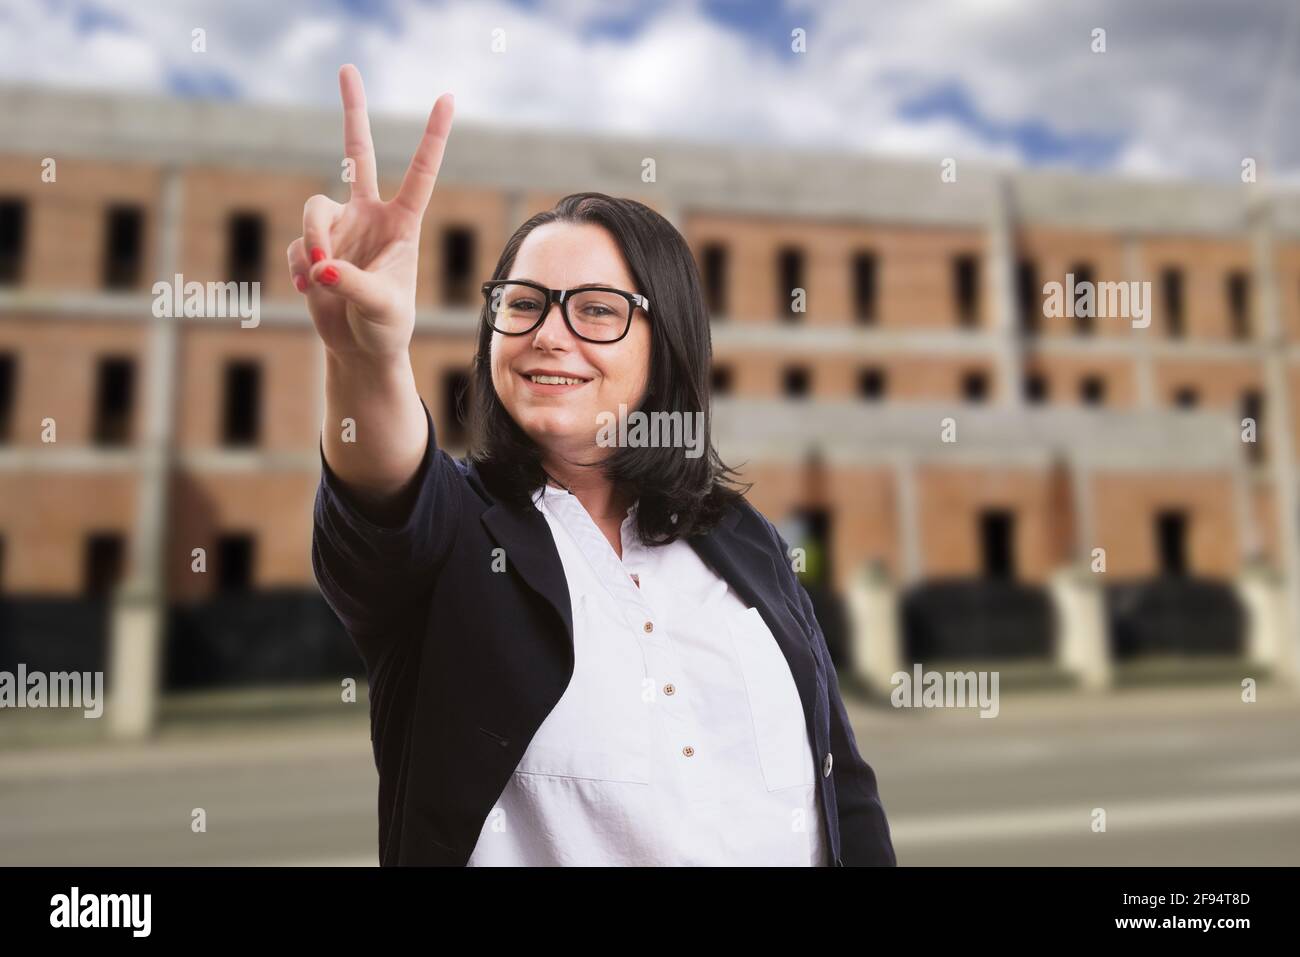 Friendly adult businesswoman in smart casual corporate suit wearing glasses showing peace or victory sign with building in construction background Stock Photo